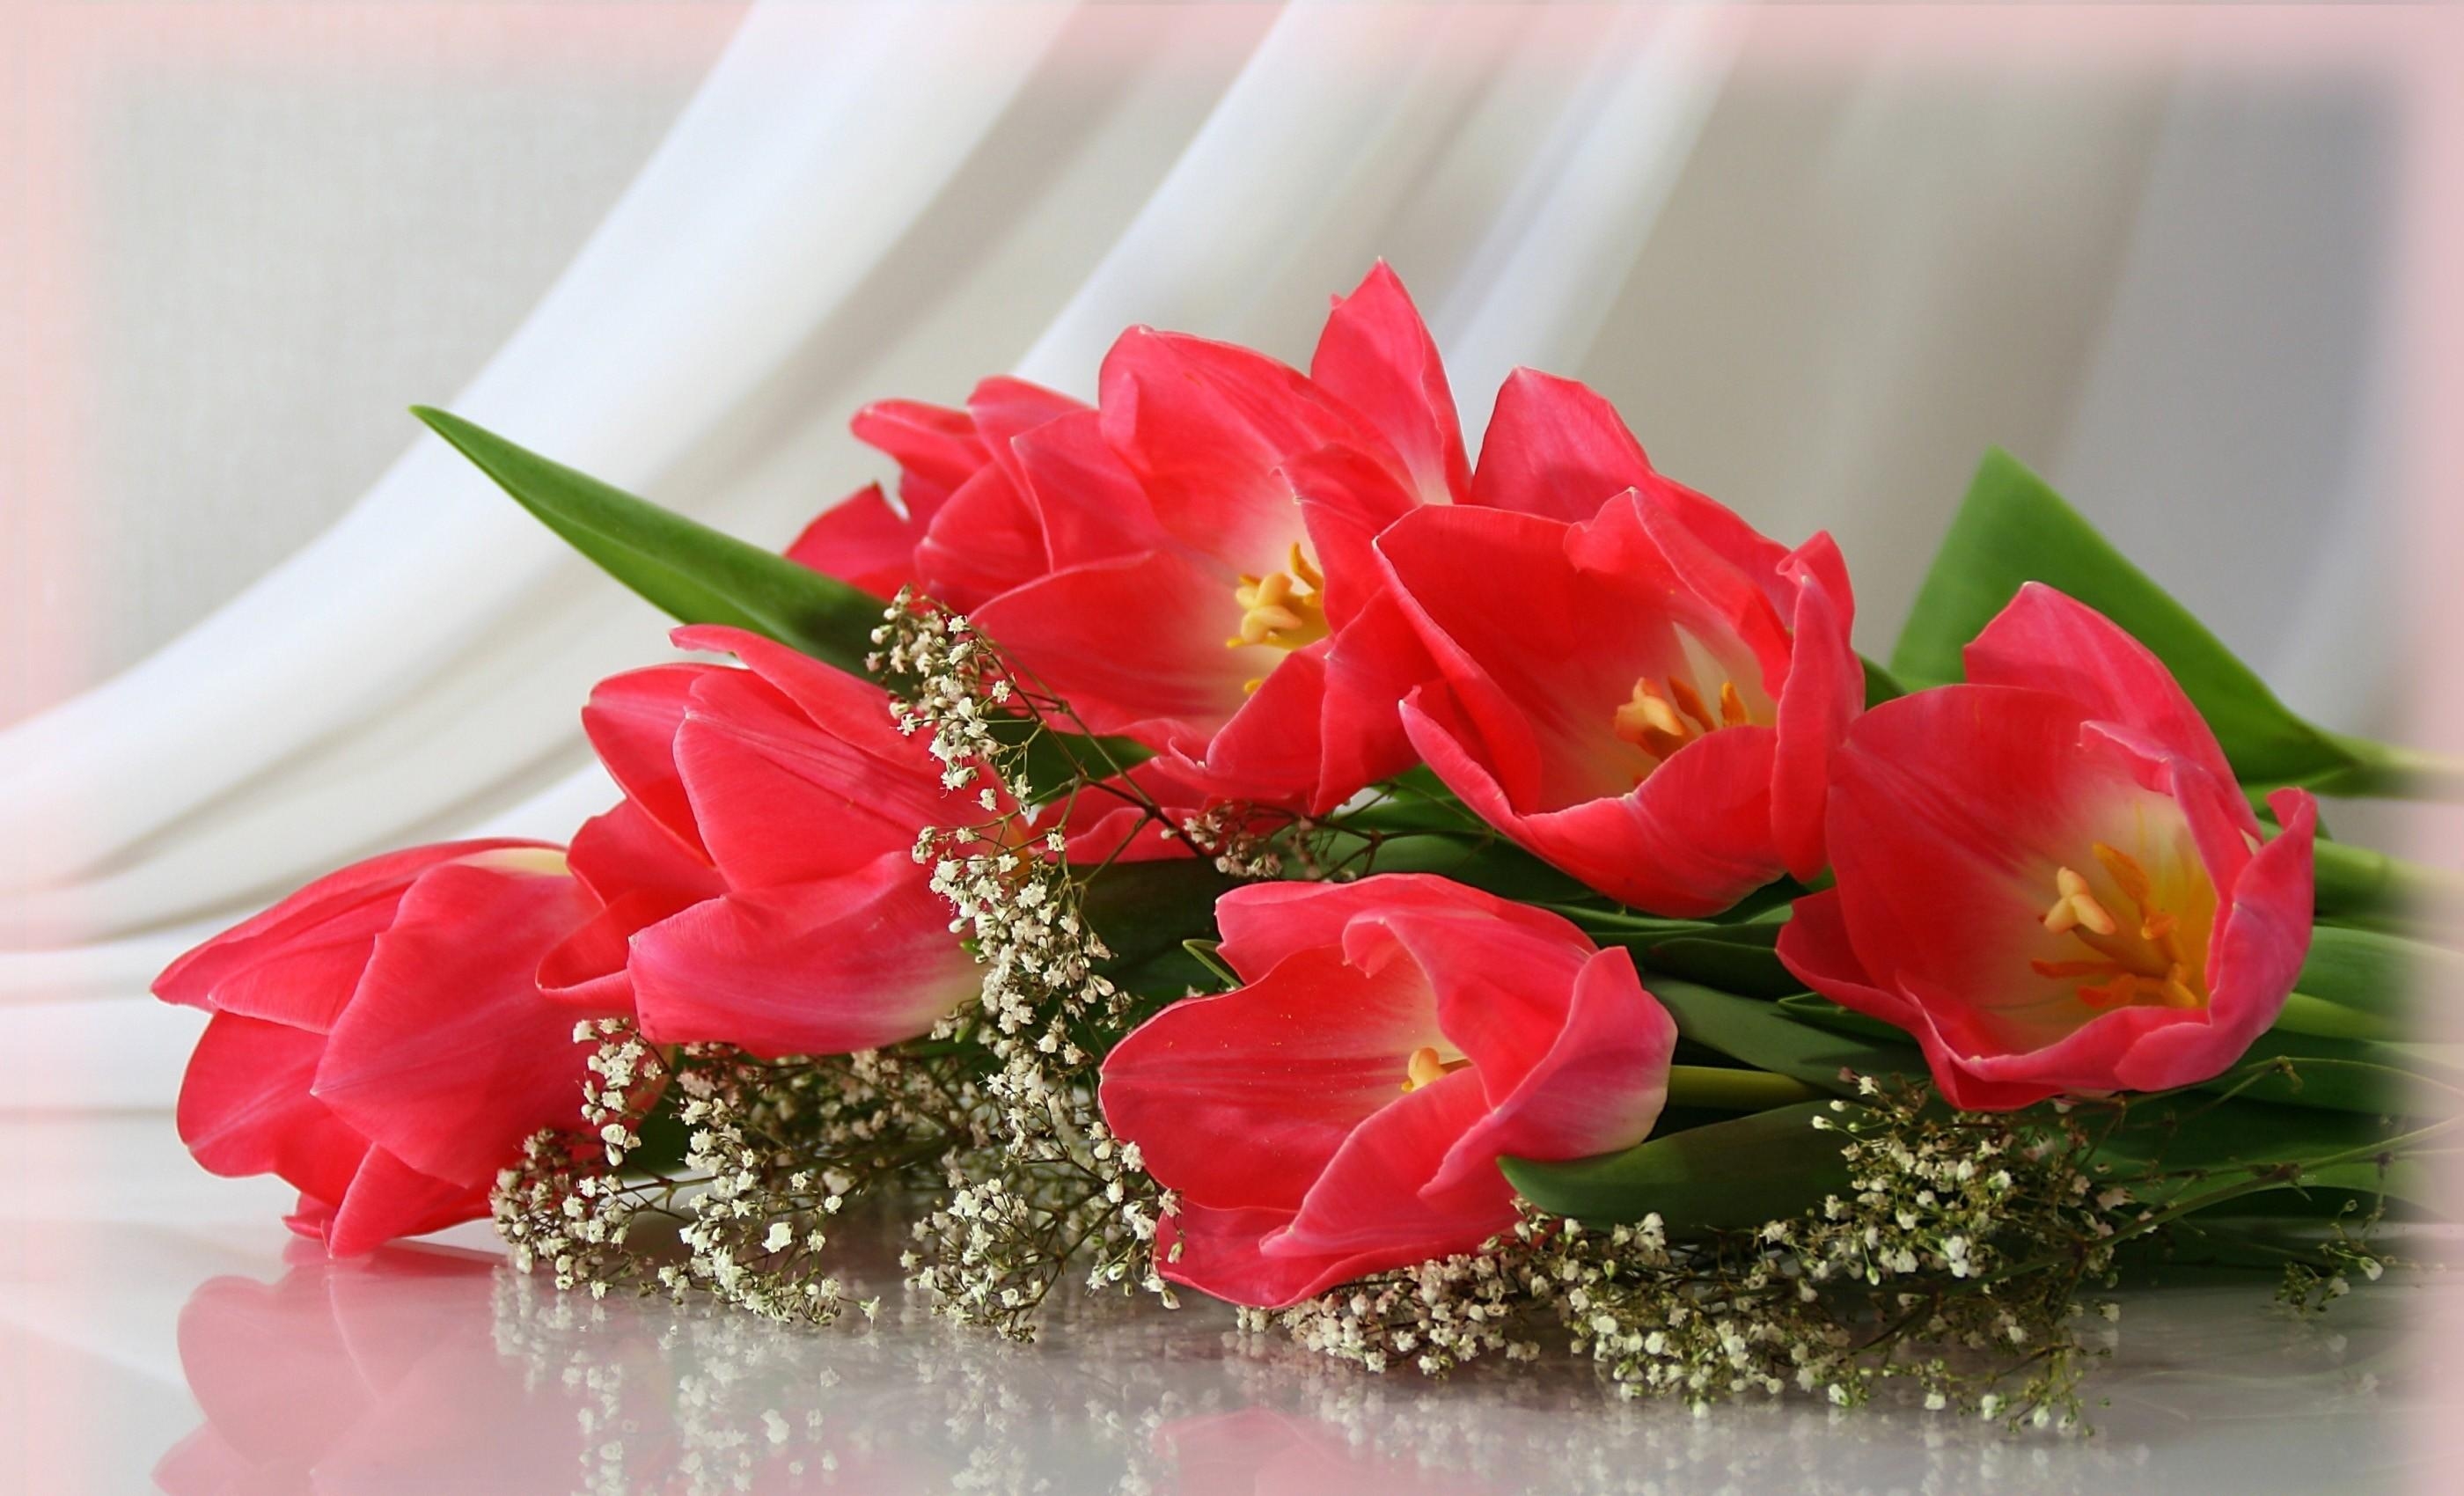 Download PC Wallpaper flowers, tulips, bouquet, gypsophilus, gipsophile, disbanded, loose, tenderness